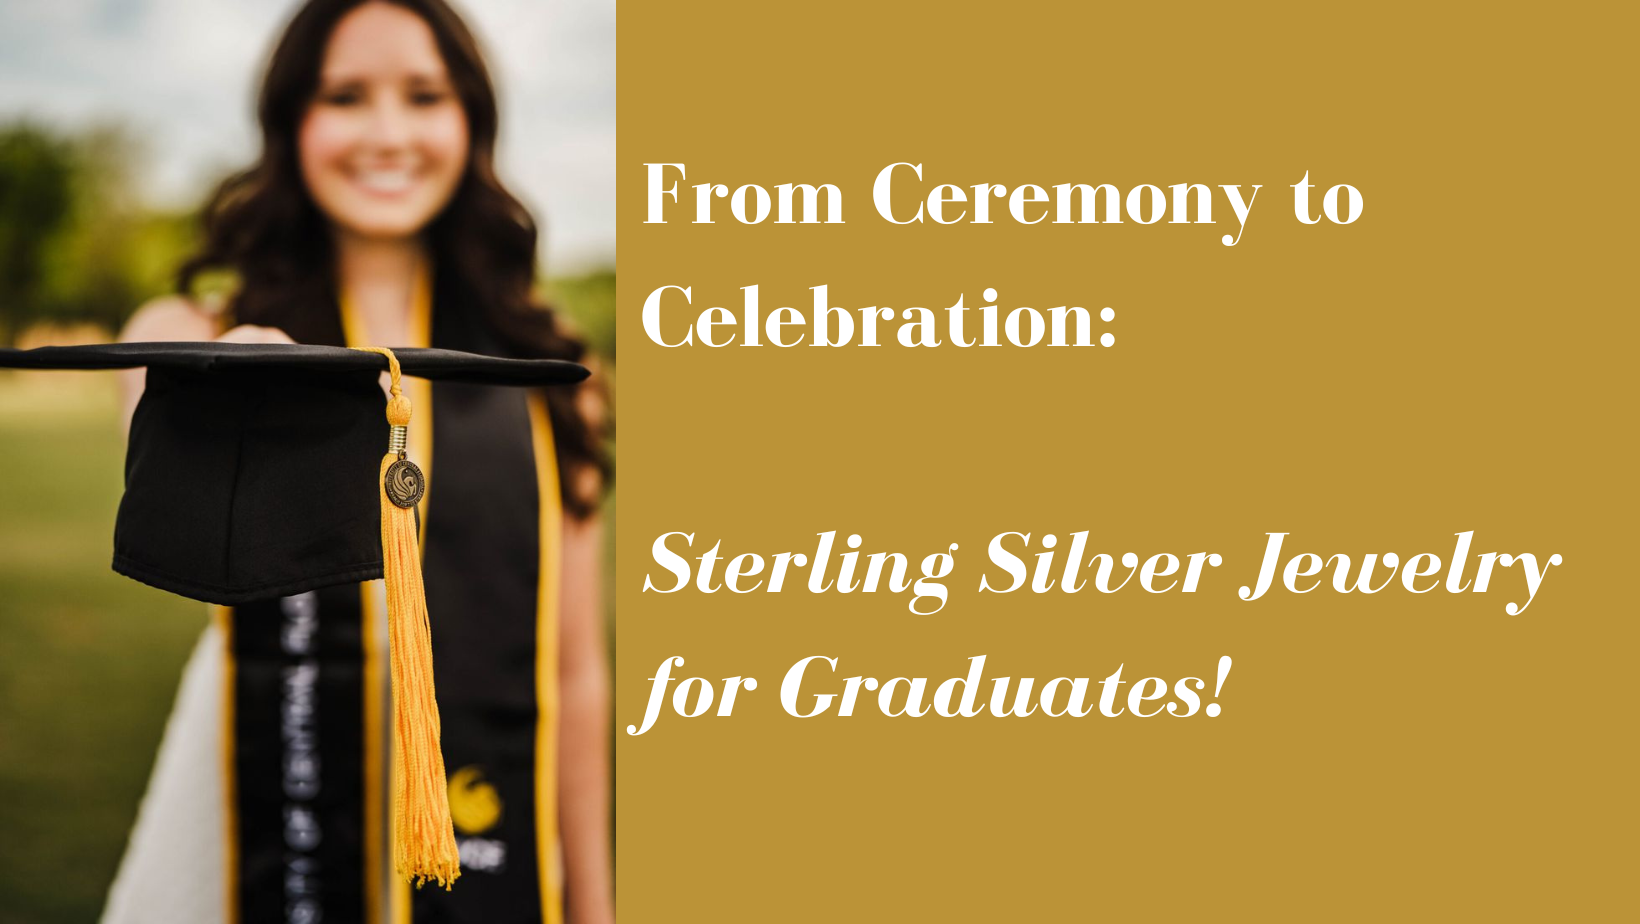 From Ceremony to Celebration: Sterling Silver Jewelry for Graduates